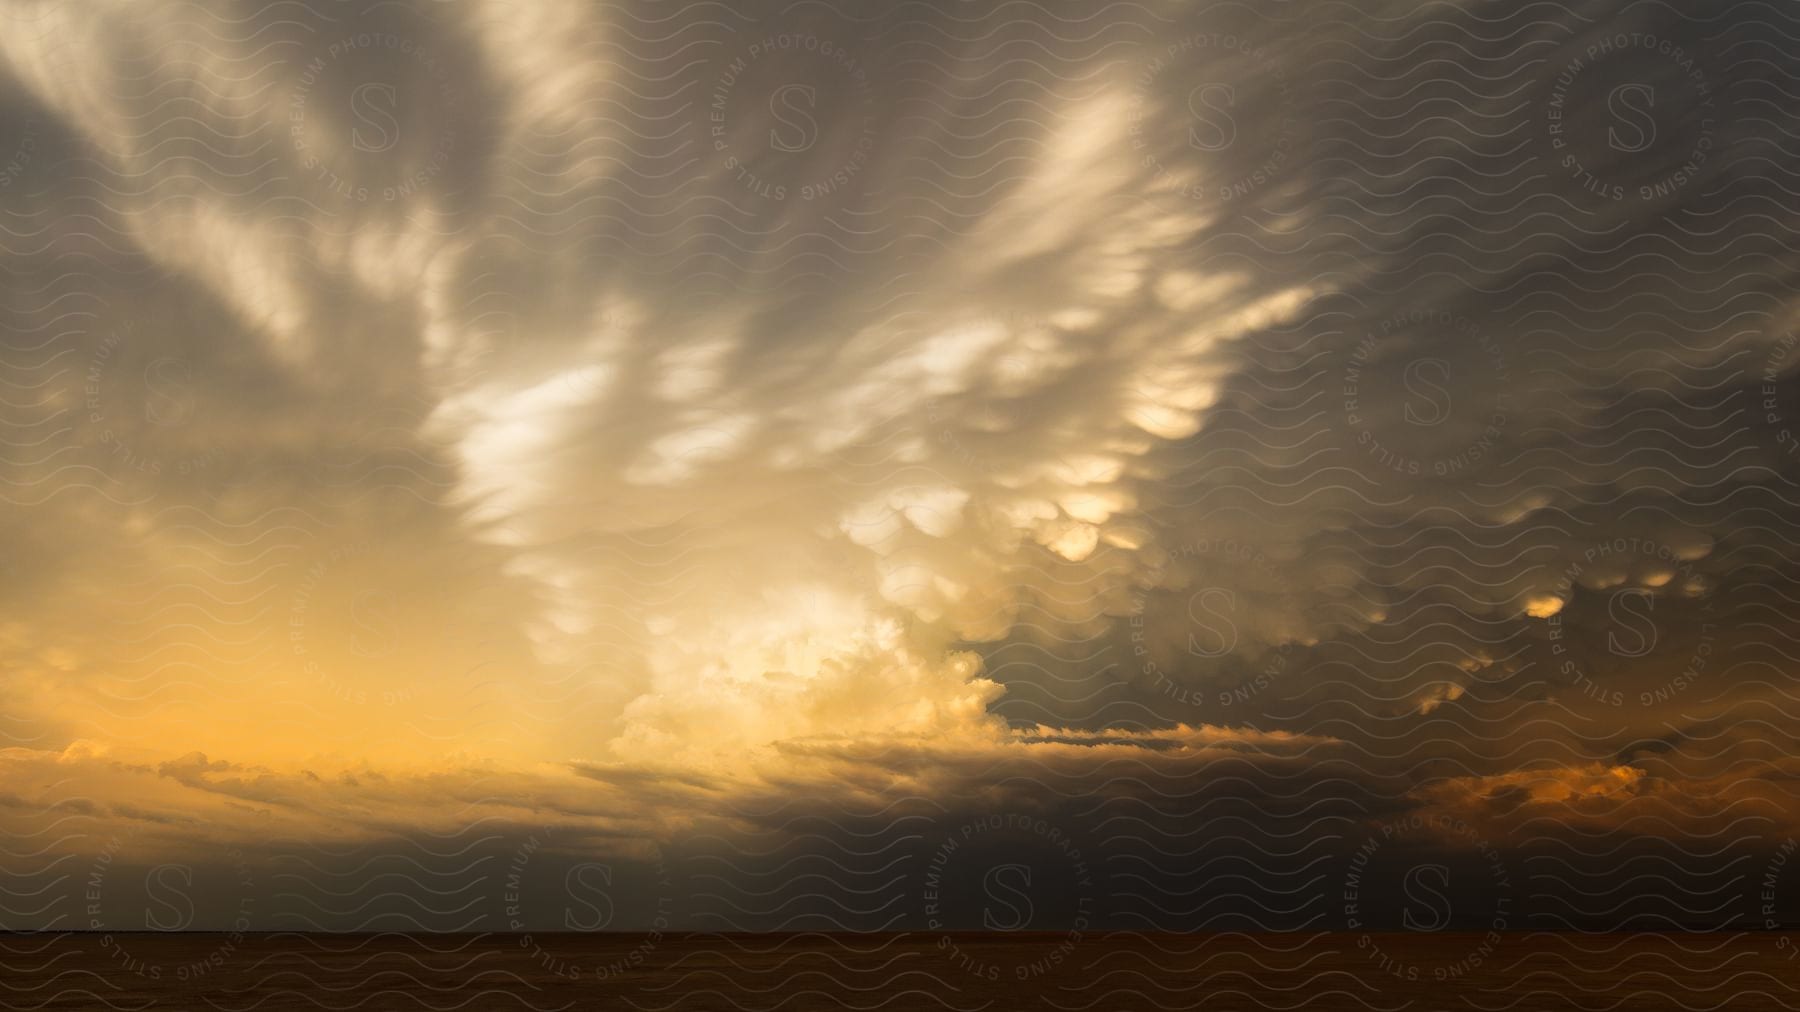 Sunset over grassland on a cloudy day near willcox arizona with stunning mammatus clouds and thunderstorms seen from the dry lake bed